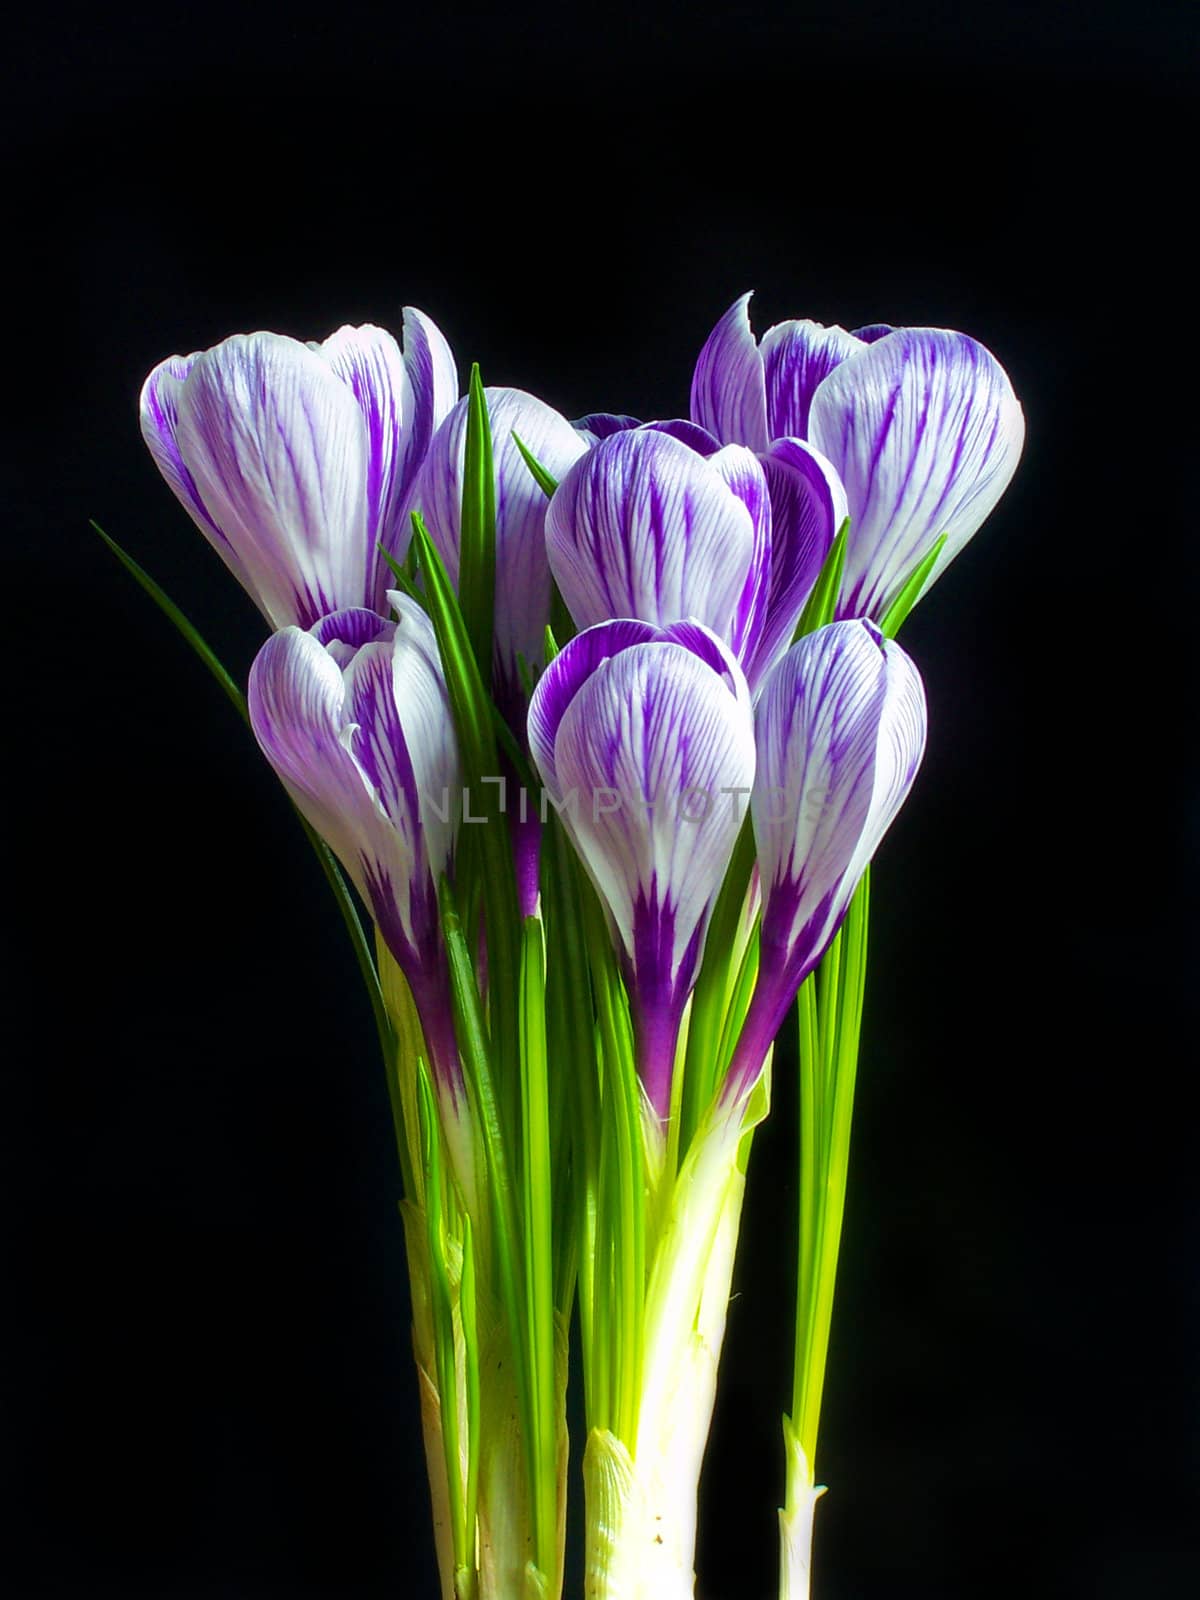 Violet and white Pickwick crocuses on the black background